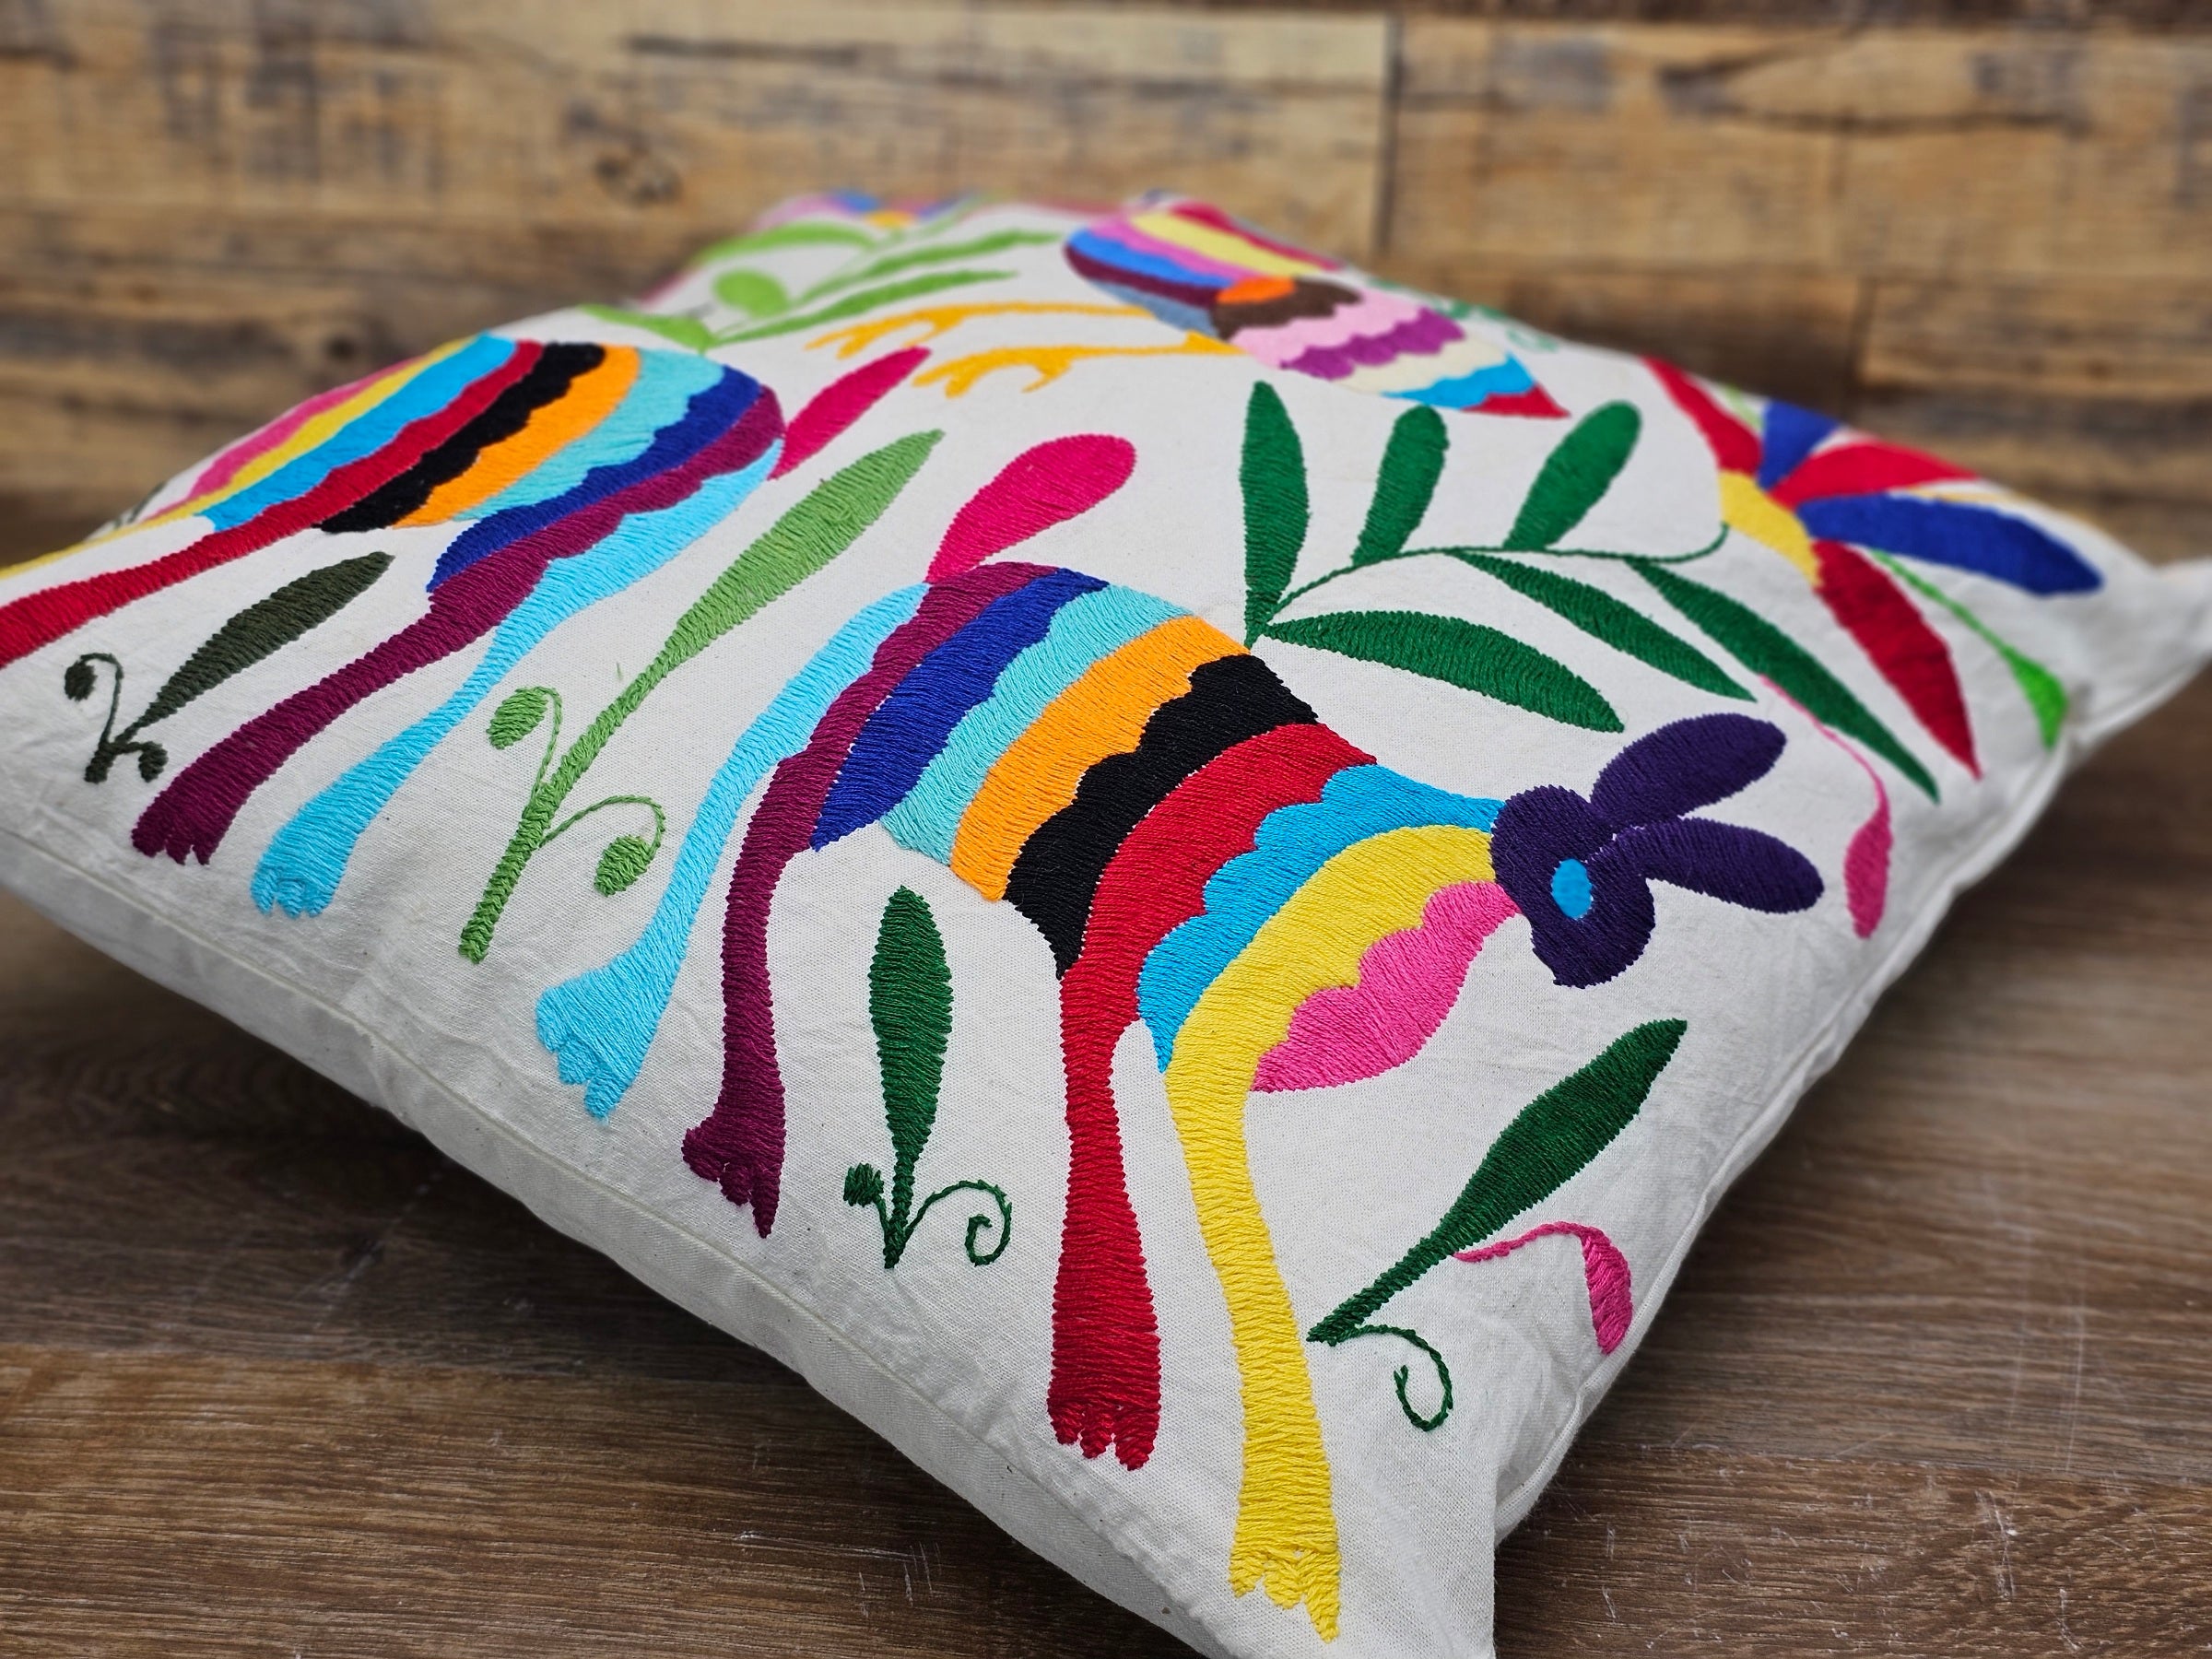 Square Otomi Tenango Pillow Cover with Hand Embroidered Birds, Flowers, and Animals in Vibrant Colors. Handmade in Mexico. Ships from the USA. Buy now at www.felipeandgrace.com.